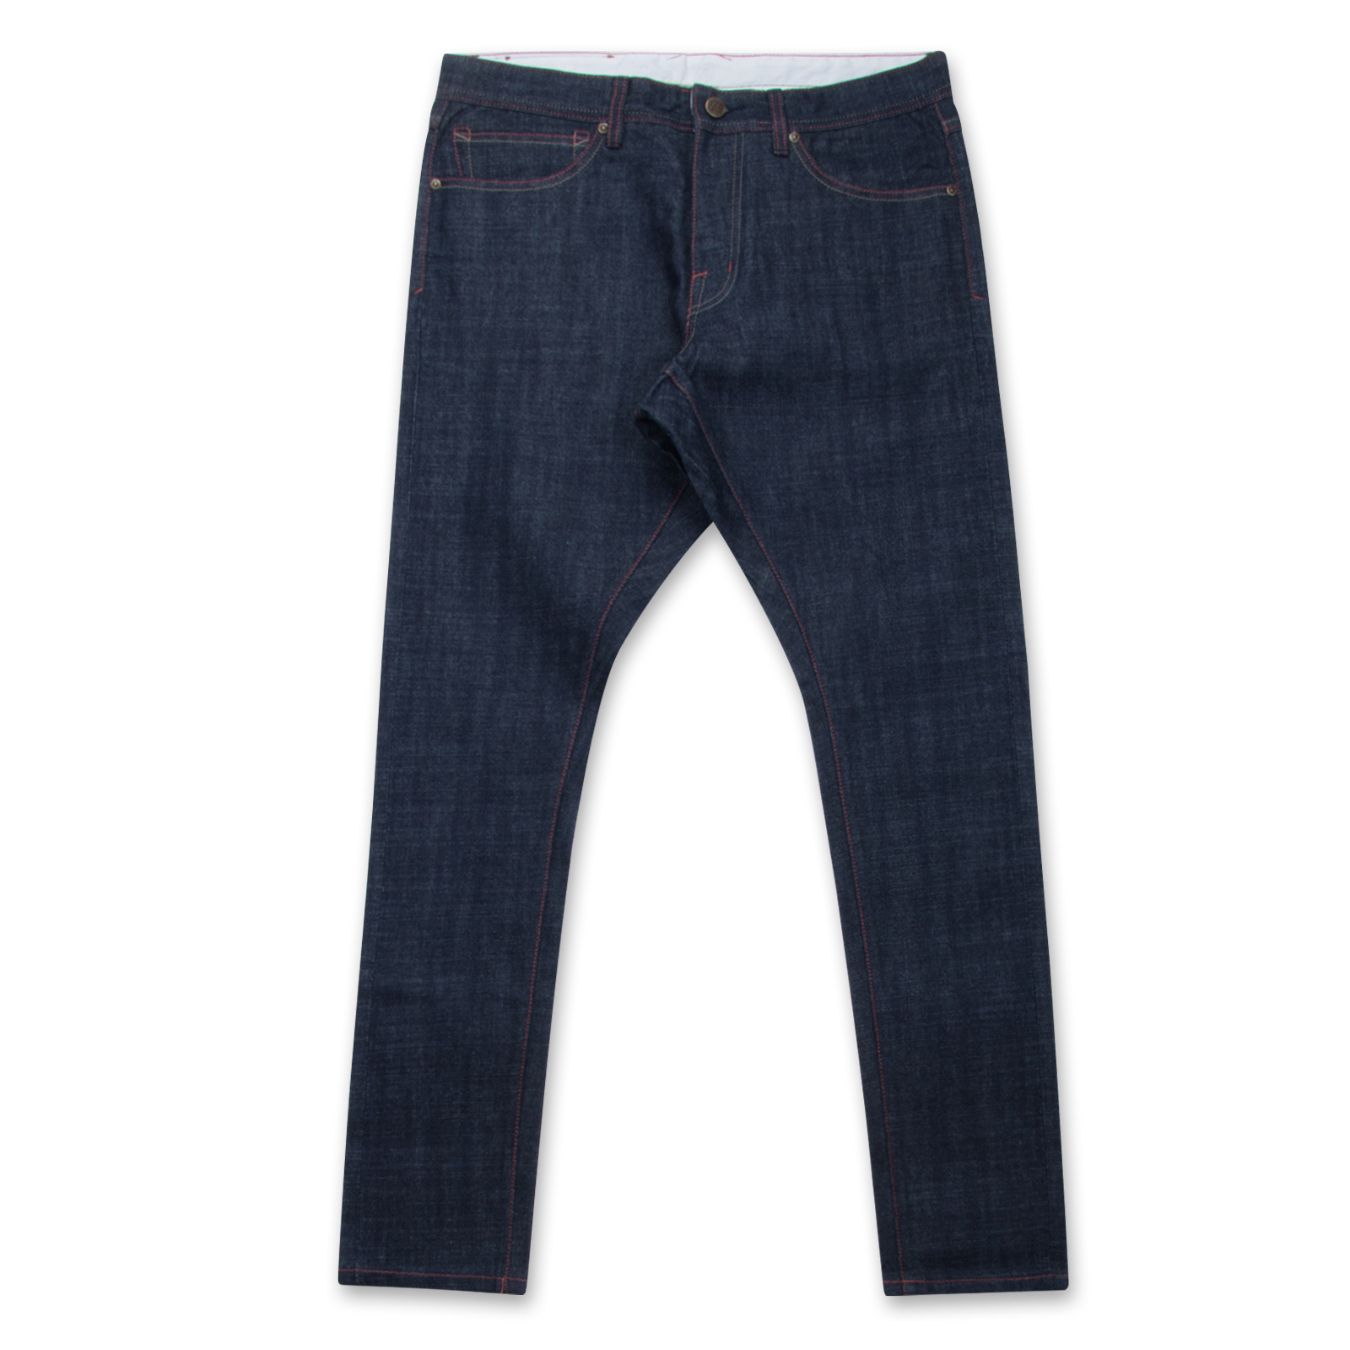 'George Raw' Athletic Selvedge Jeans